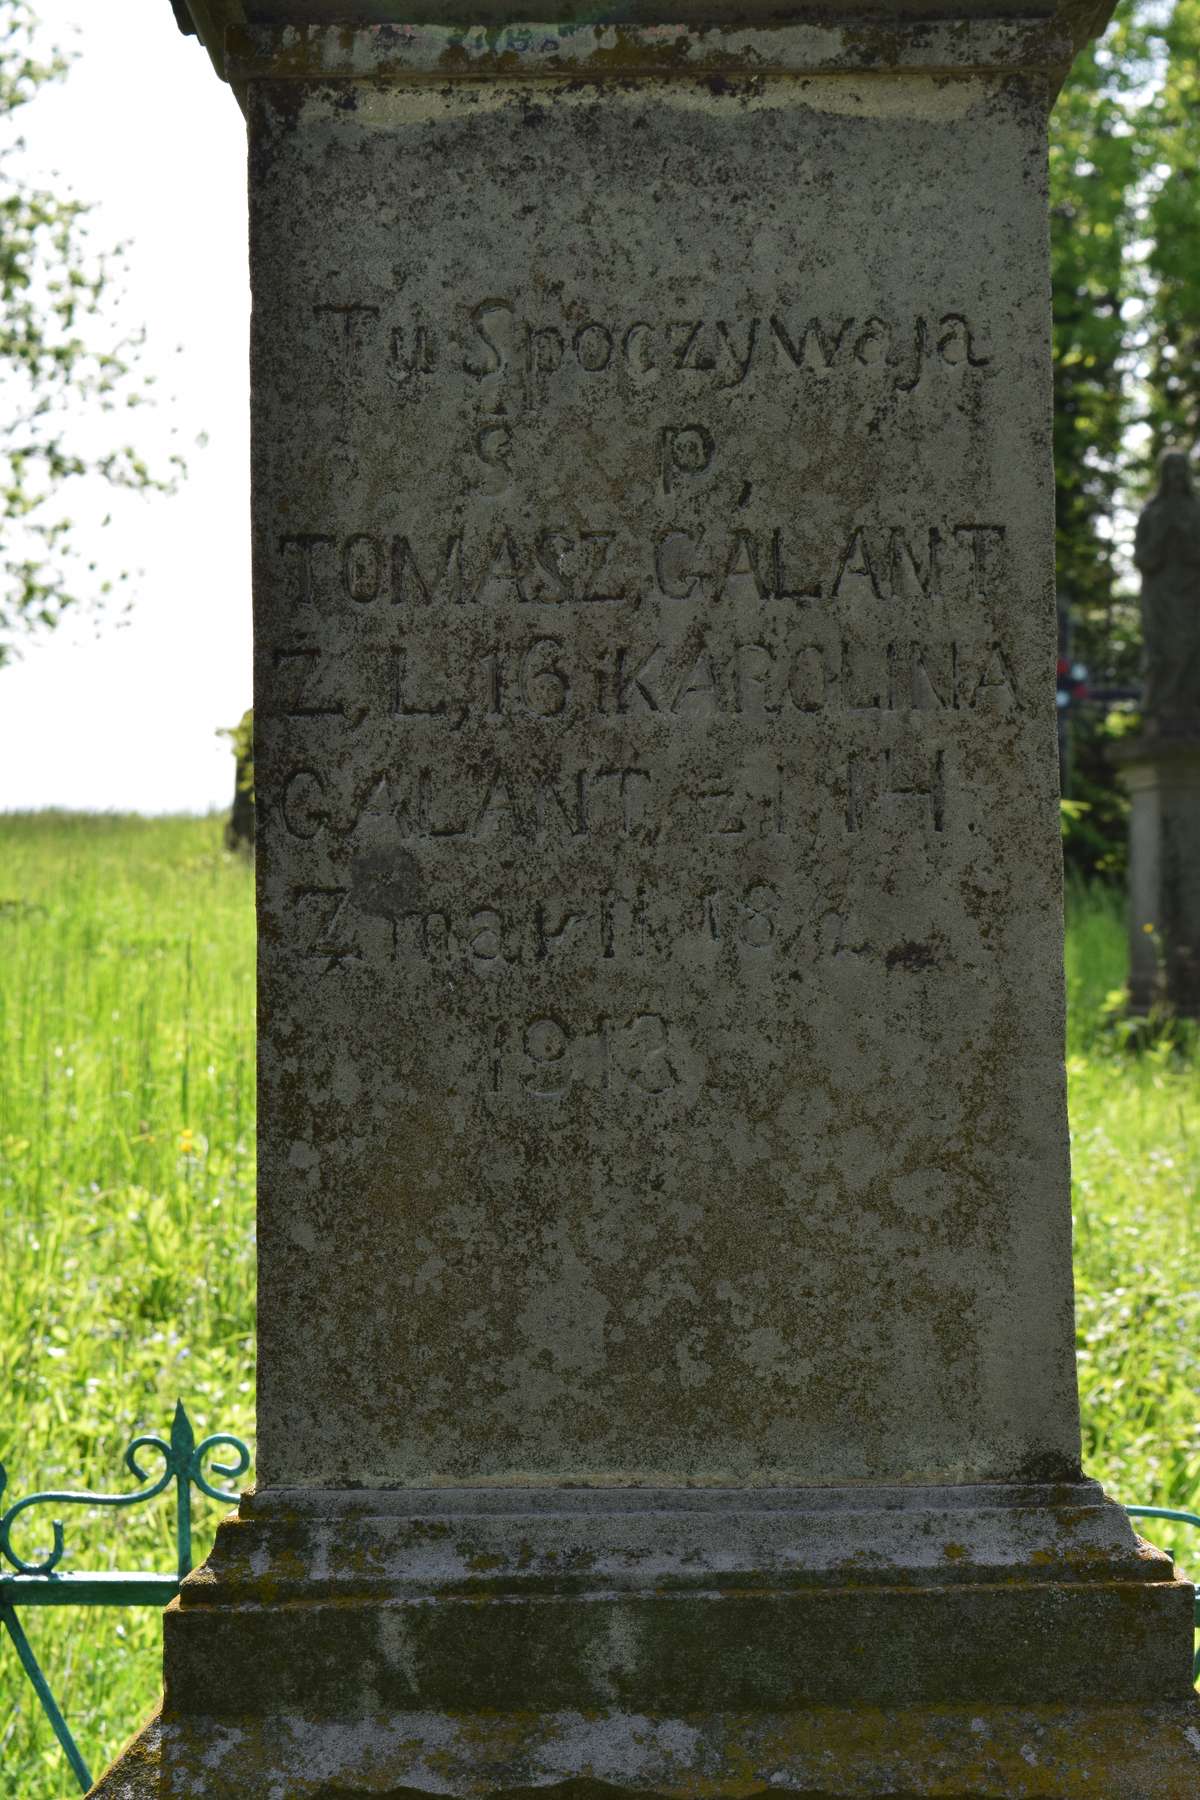 Inscription from the tombstone of Karolina and Tomasz Galant, cemetery in Czernielow Ruski